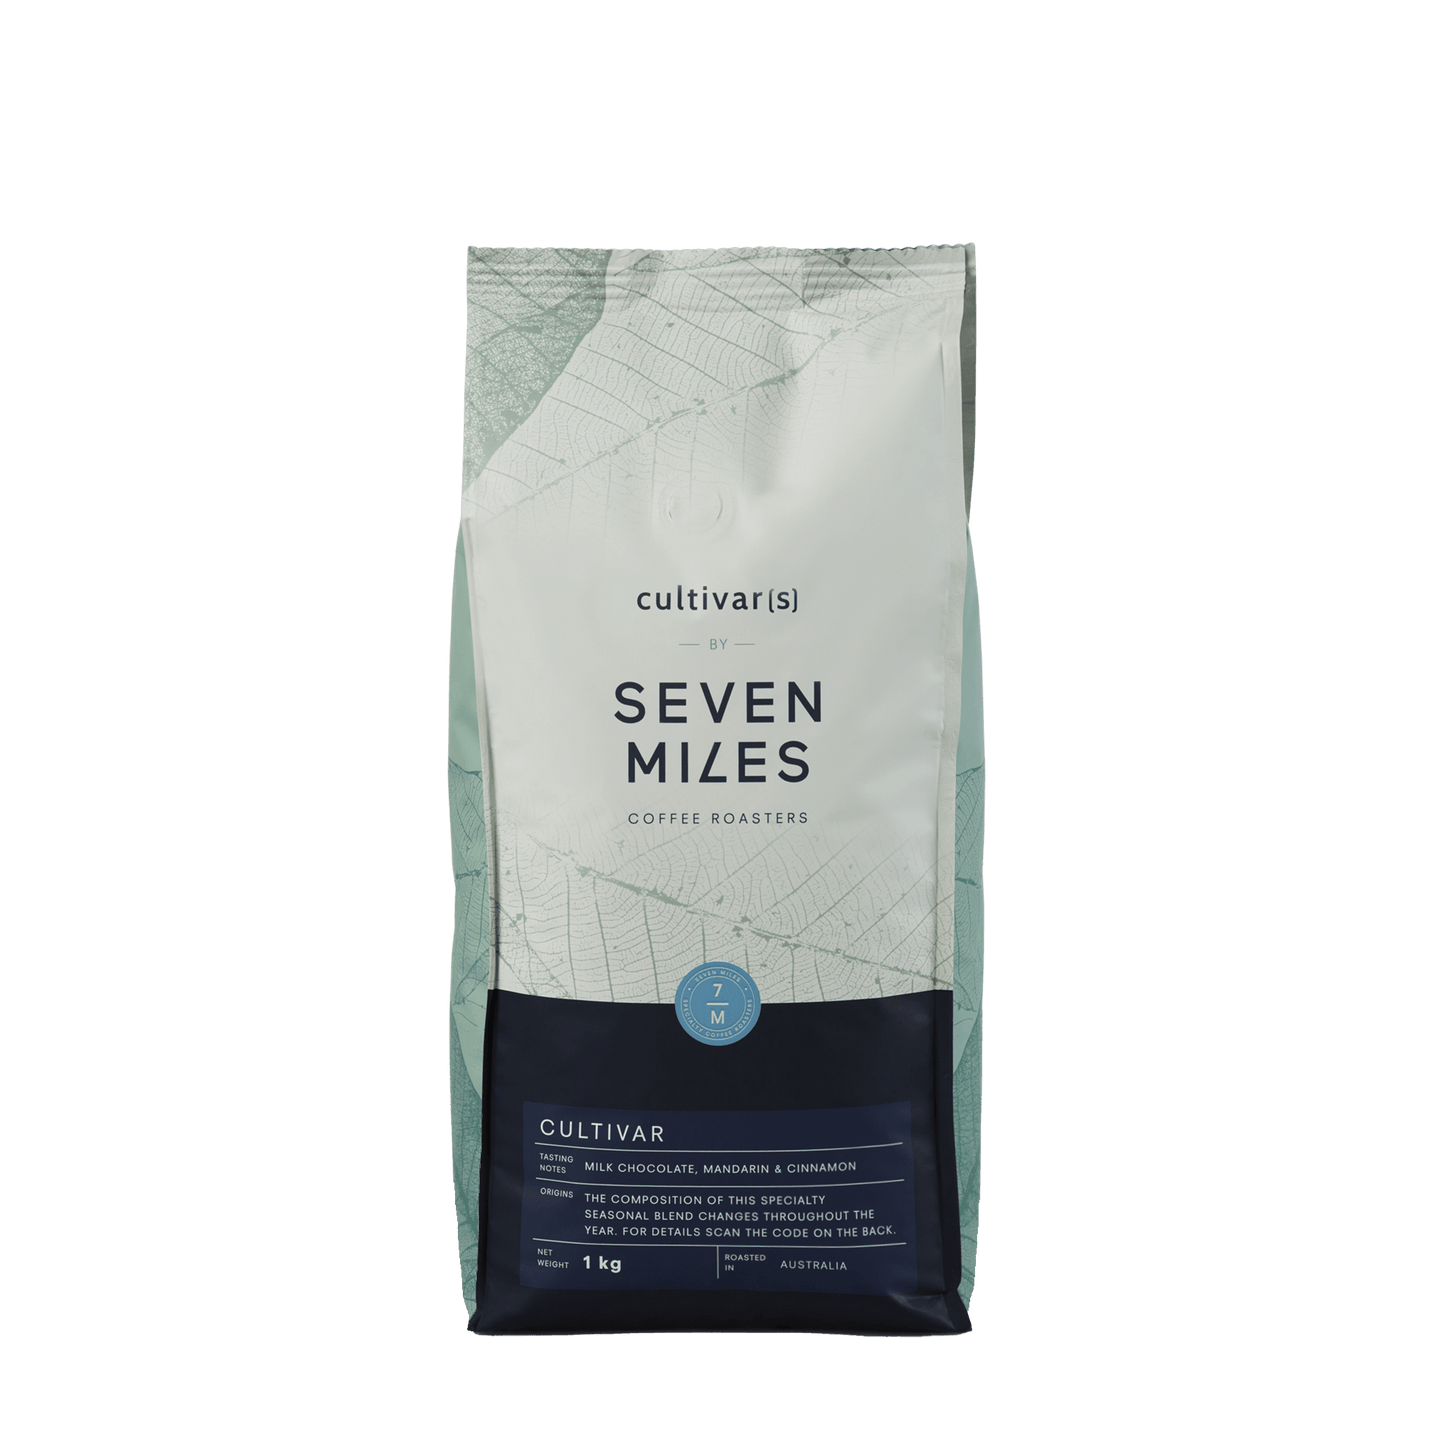 The Cultivar coffee blend 1kg is a washed Burundi, a Java that’s been processed through wet hulling, and a stunning natural Brazil from the Mountainous south-east Mantiqueira region. It delivers a beautifully balanced blend of creamy milk chocolate flavours combined with elegant notes of mandarin & cinnamon spice. 